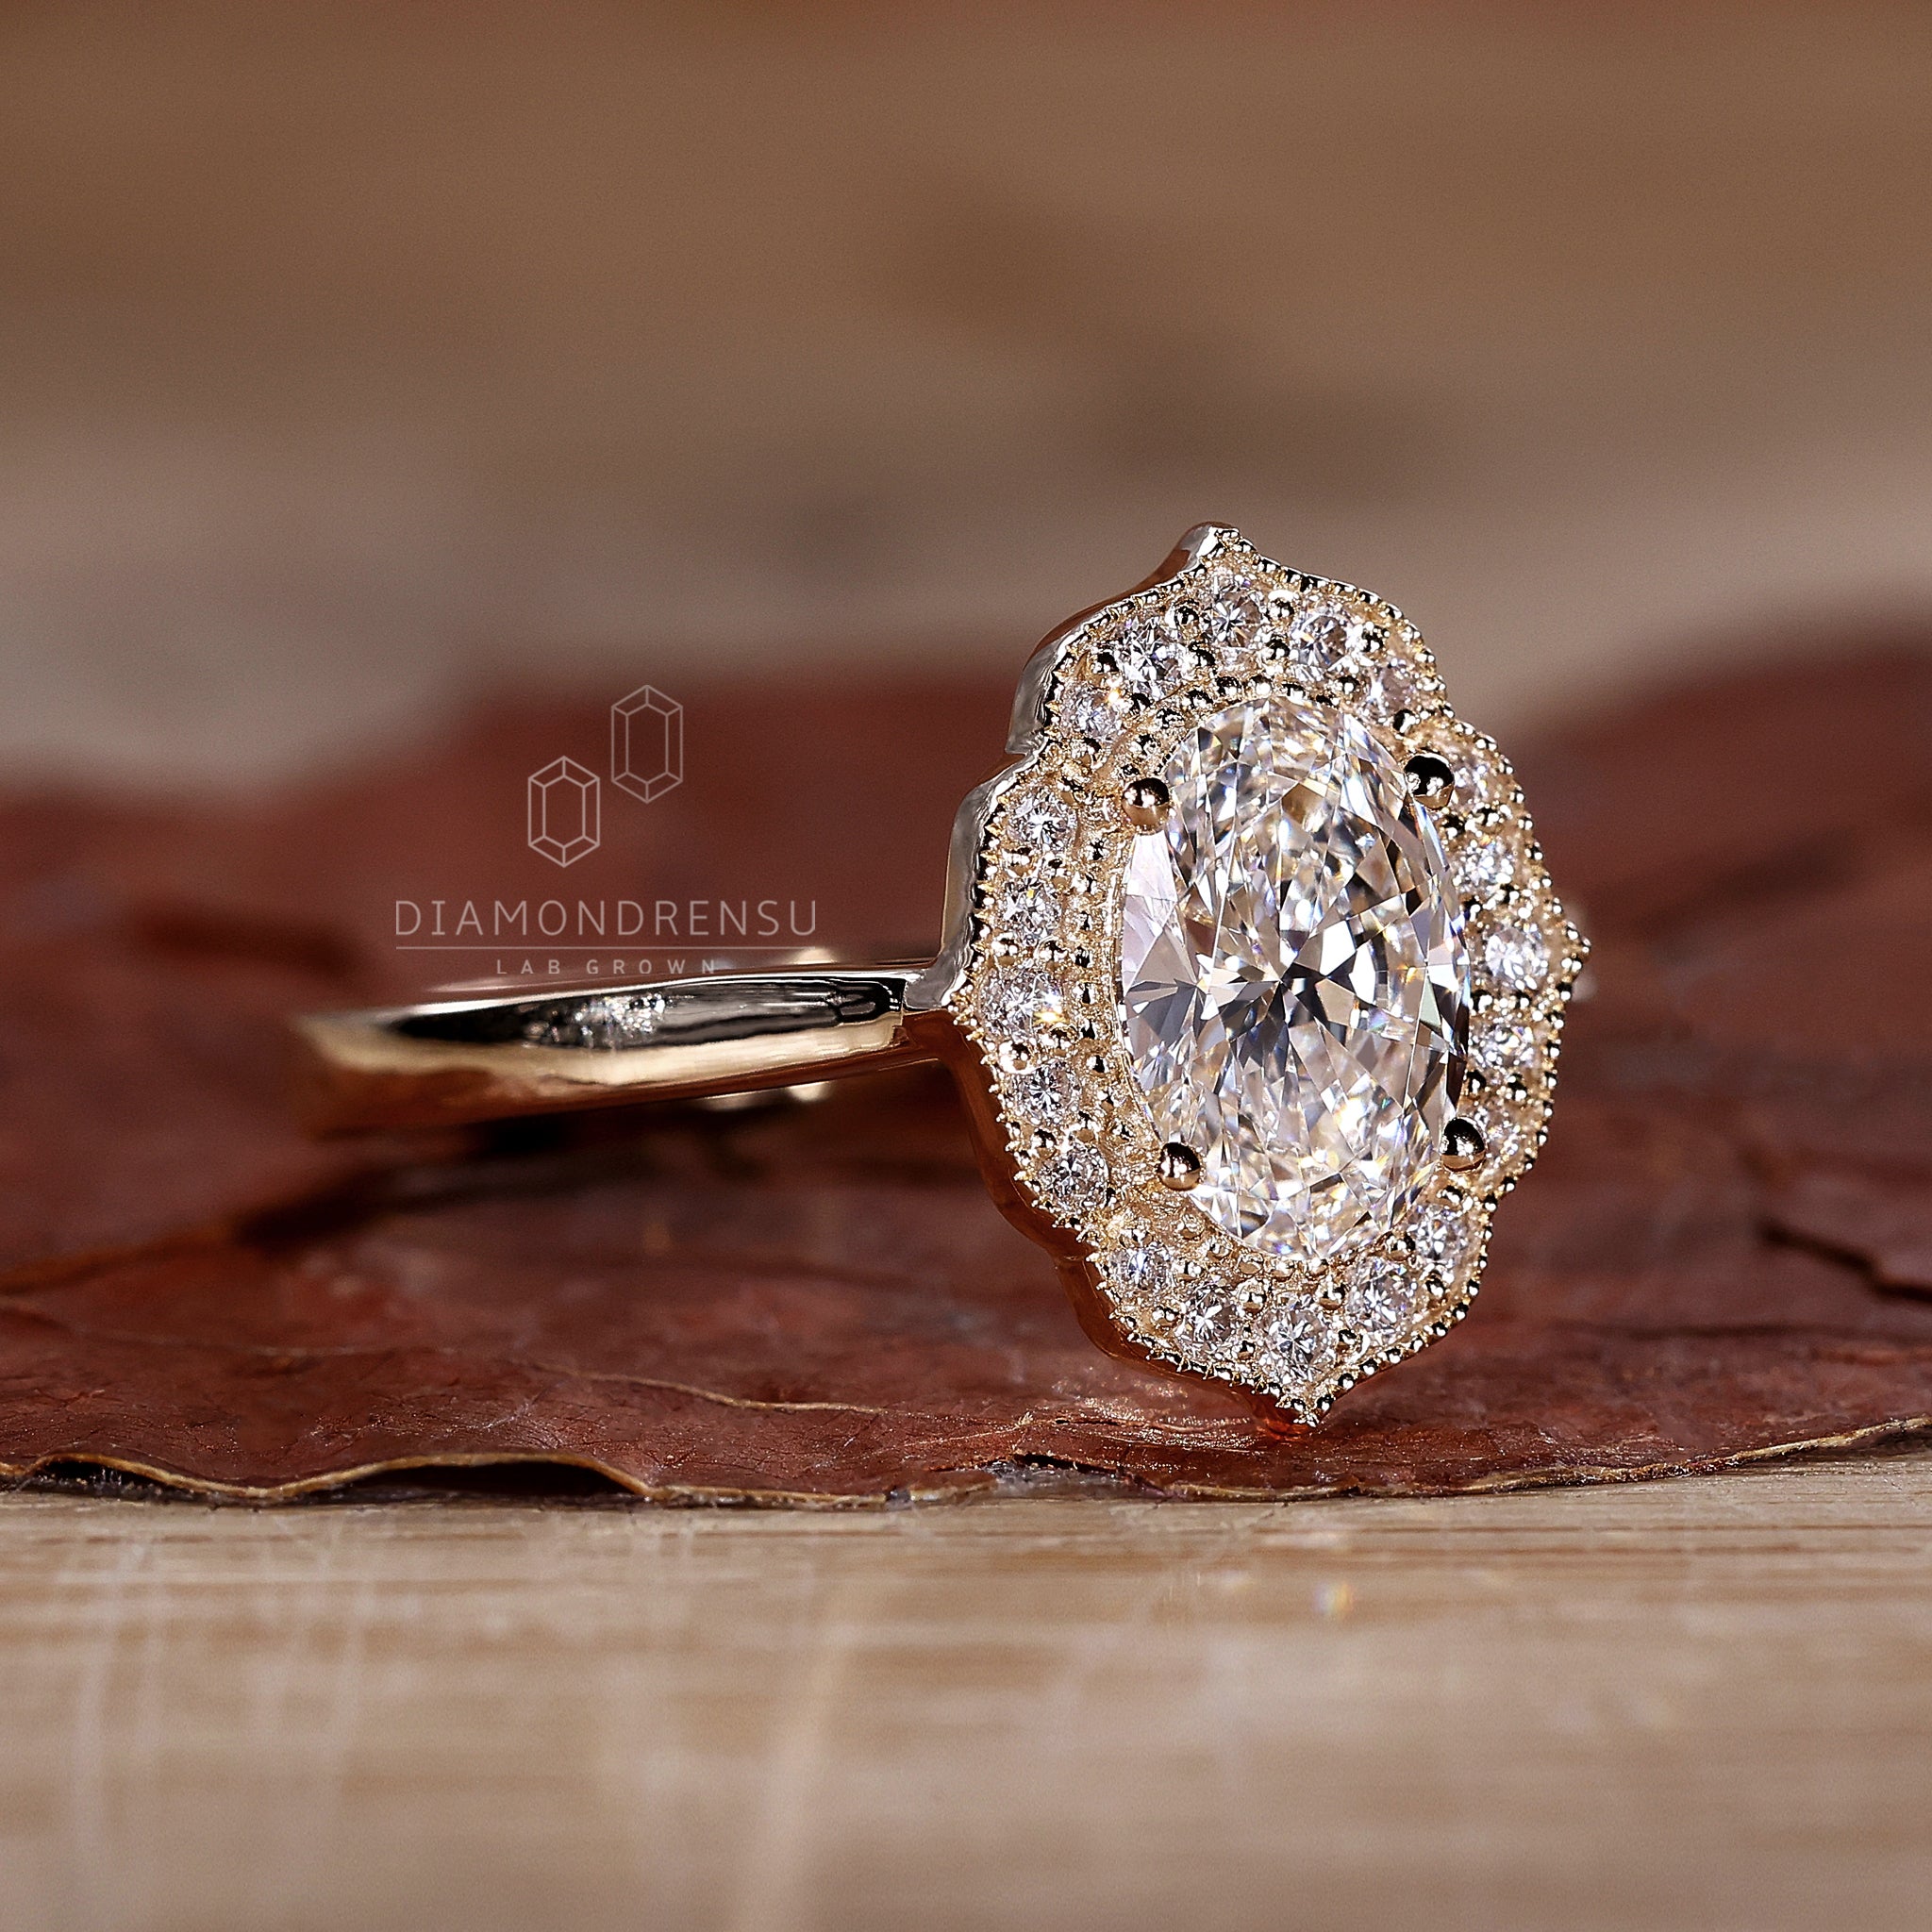 Intricate vintage halo ring featuring a central round diamond surrounded by smaller gems.